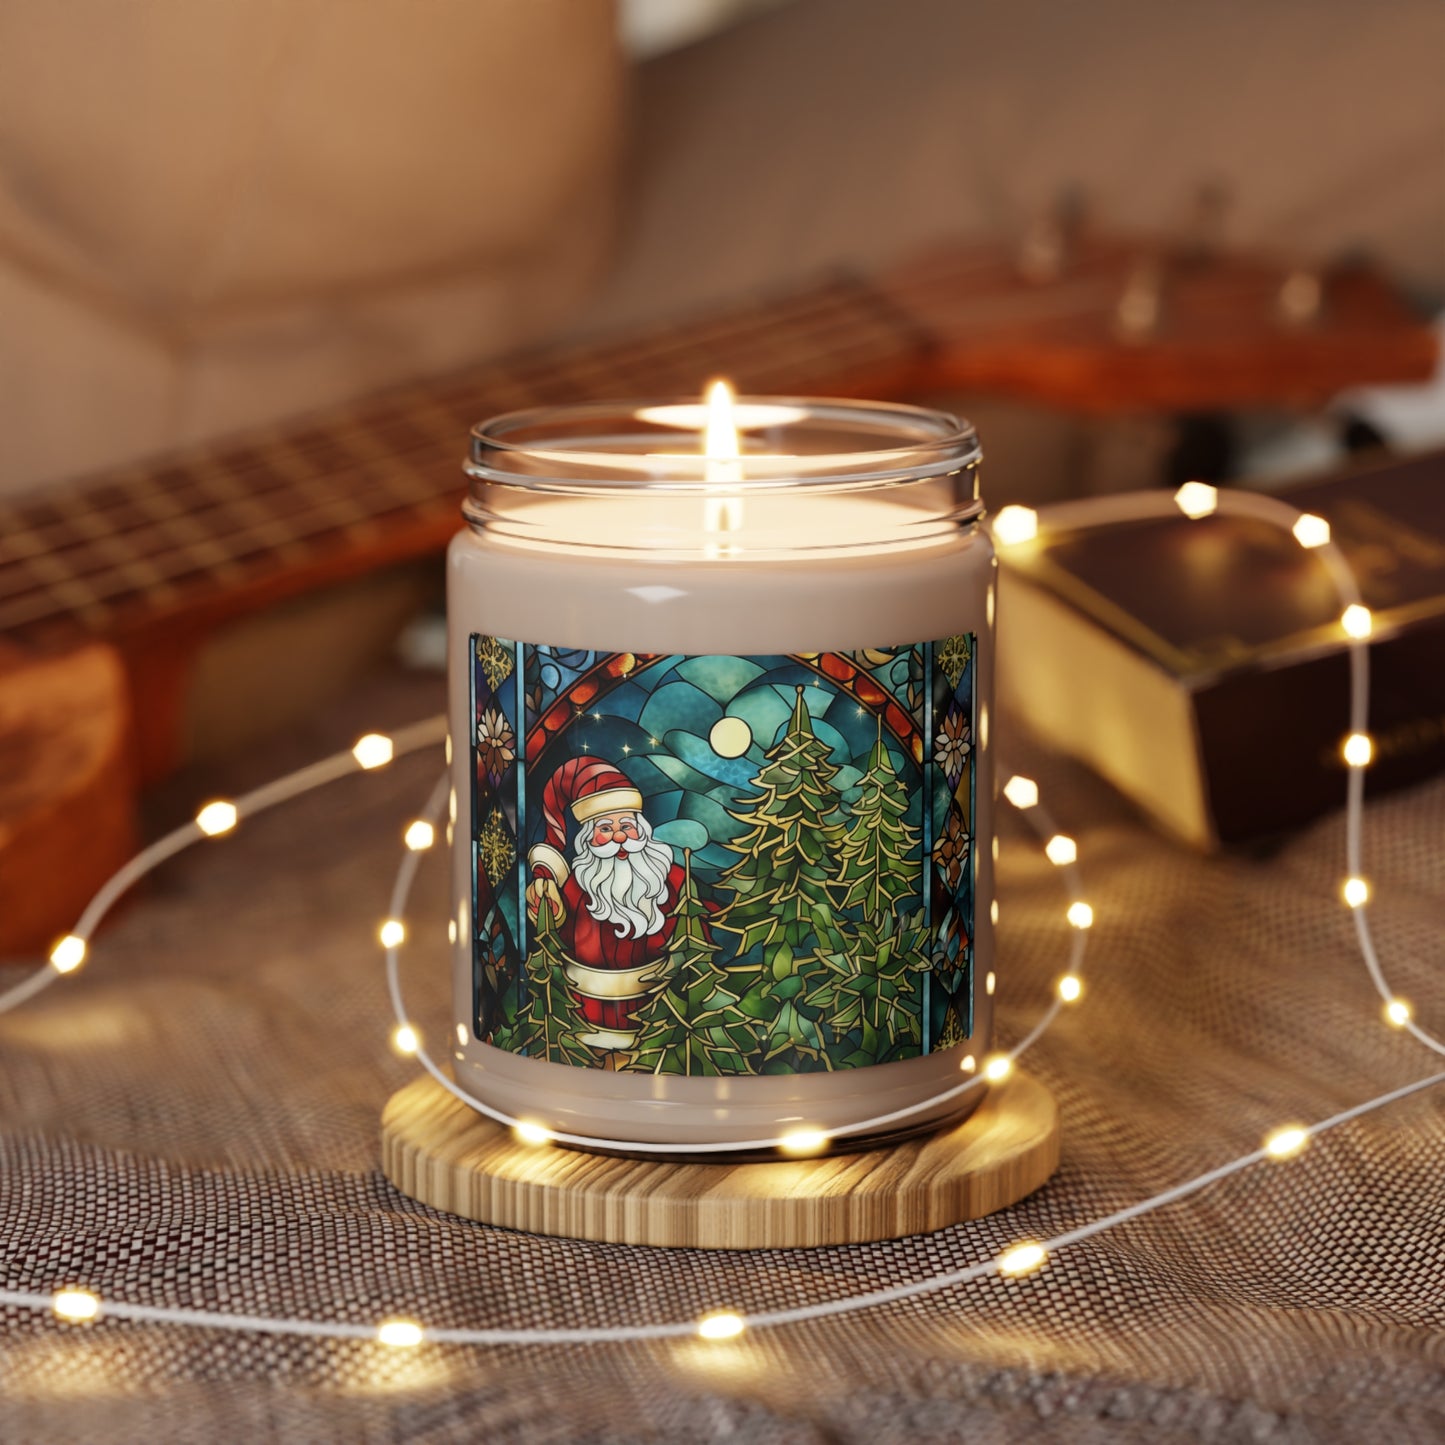 Santa Clause in the moonlight with trees | Scented Soy Candle | 9oz |  50-60 hours of Burning Time